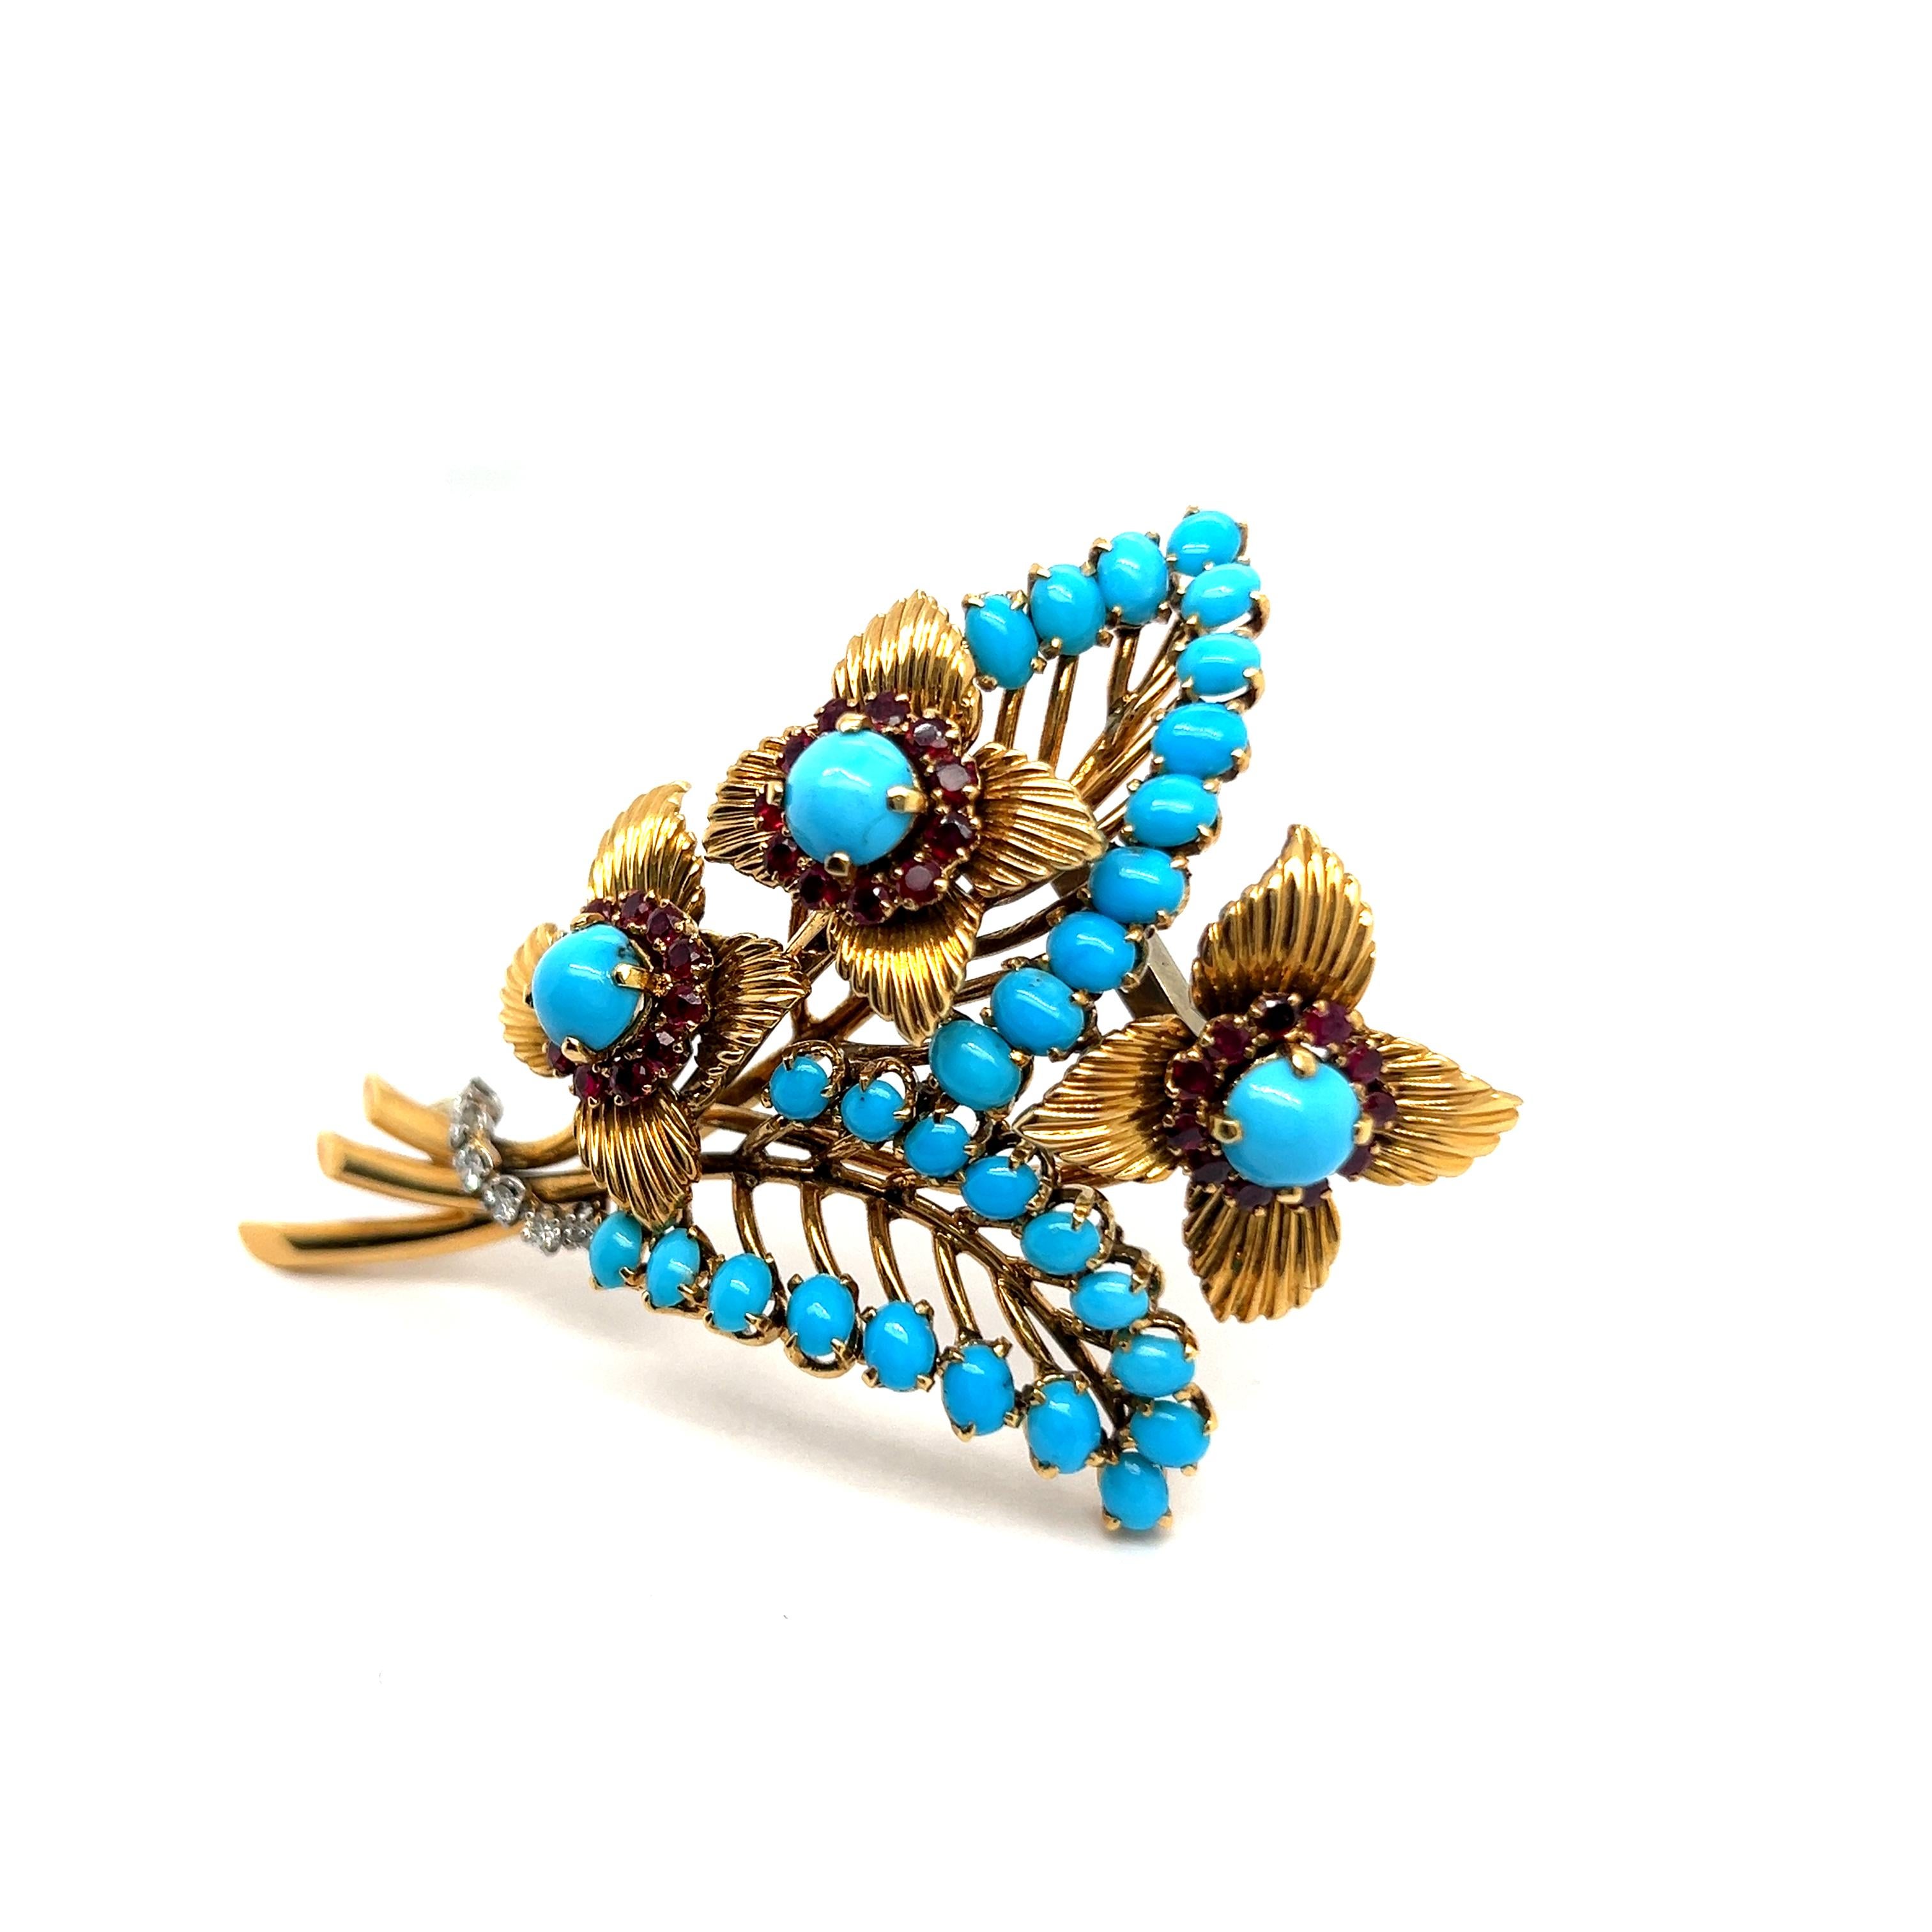 Introducing a captivating piece from Gübelin jewelers, a mid-20th-century brooch exuding timeless charm. Crafted with precision, its delicate bouquet design features three blossoms cradling a heart of turquoise, highlighted by a graceful arrangement